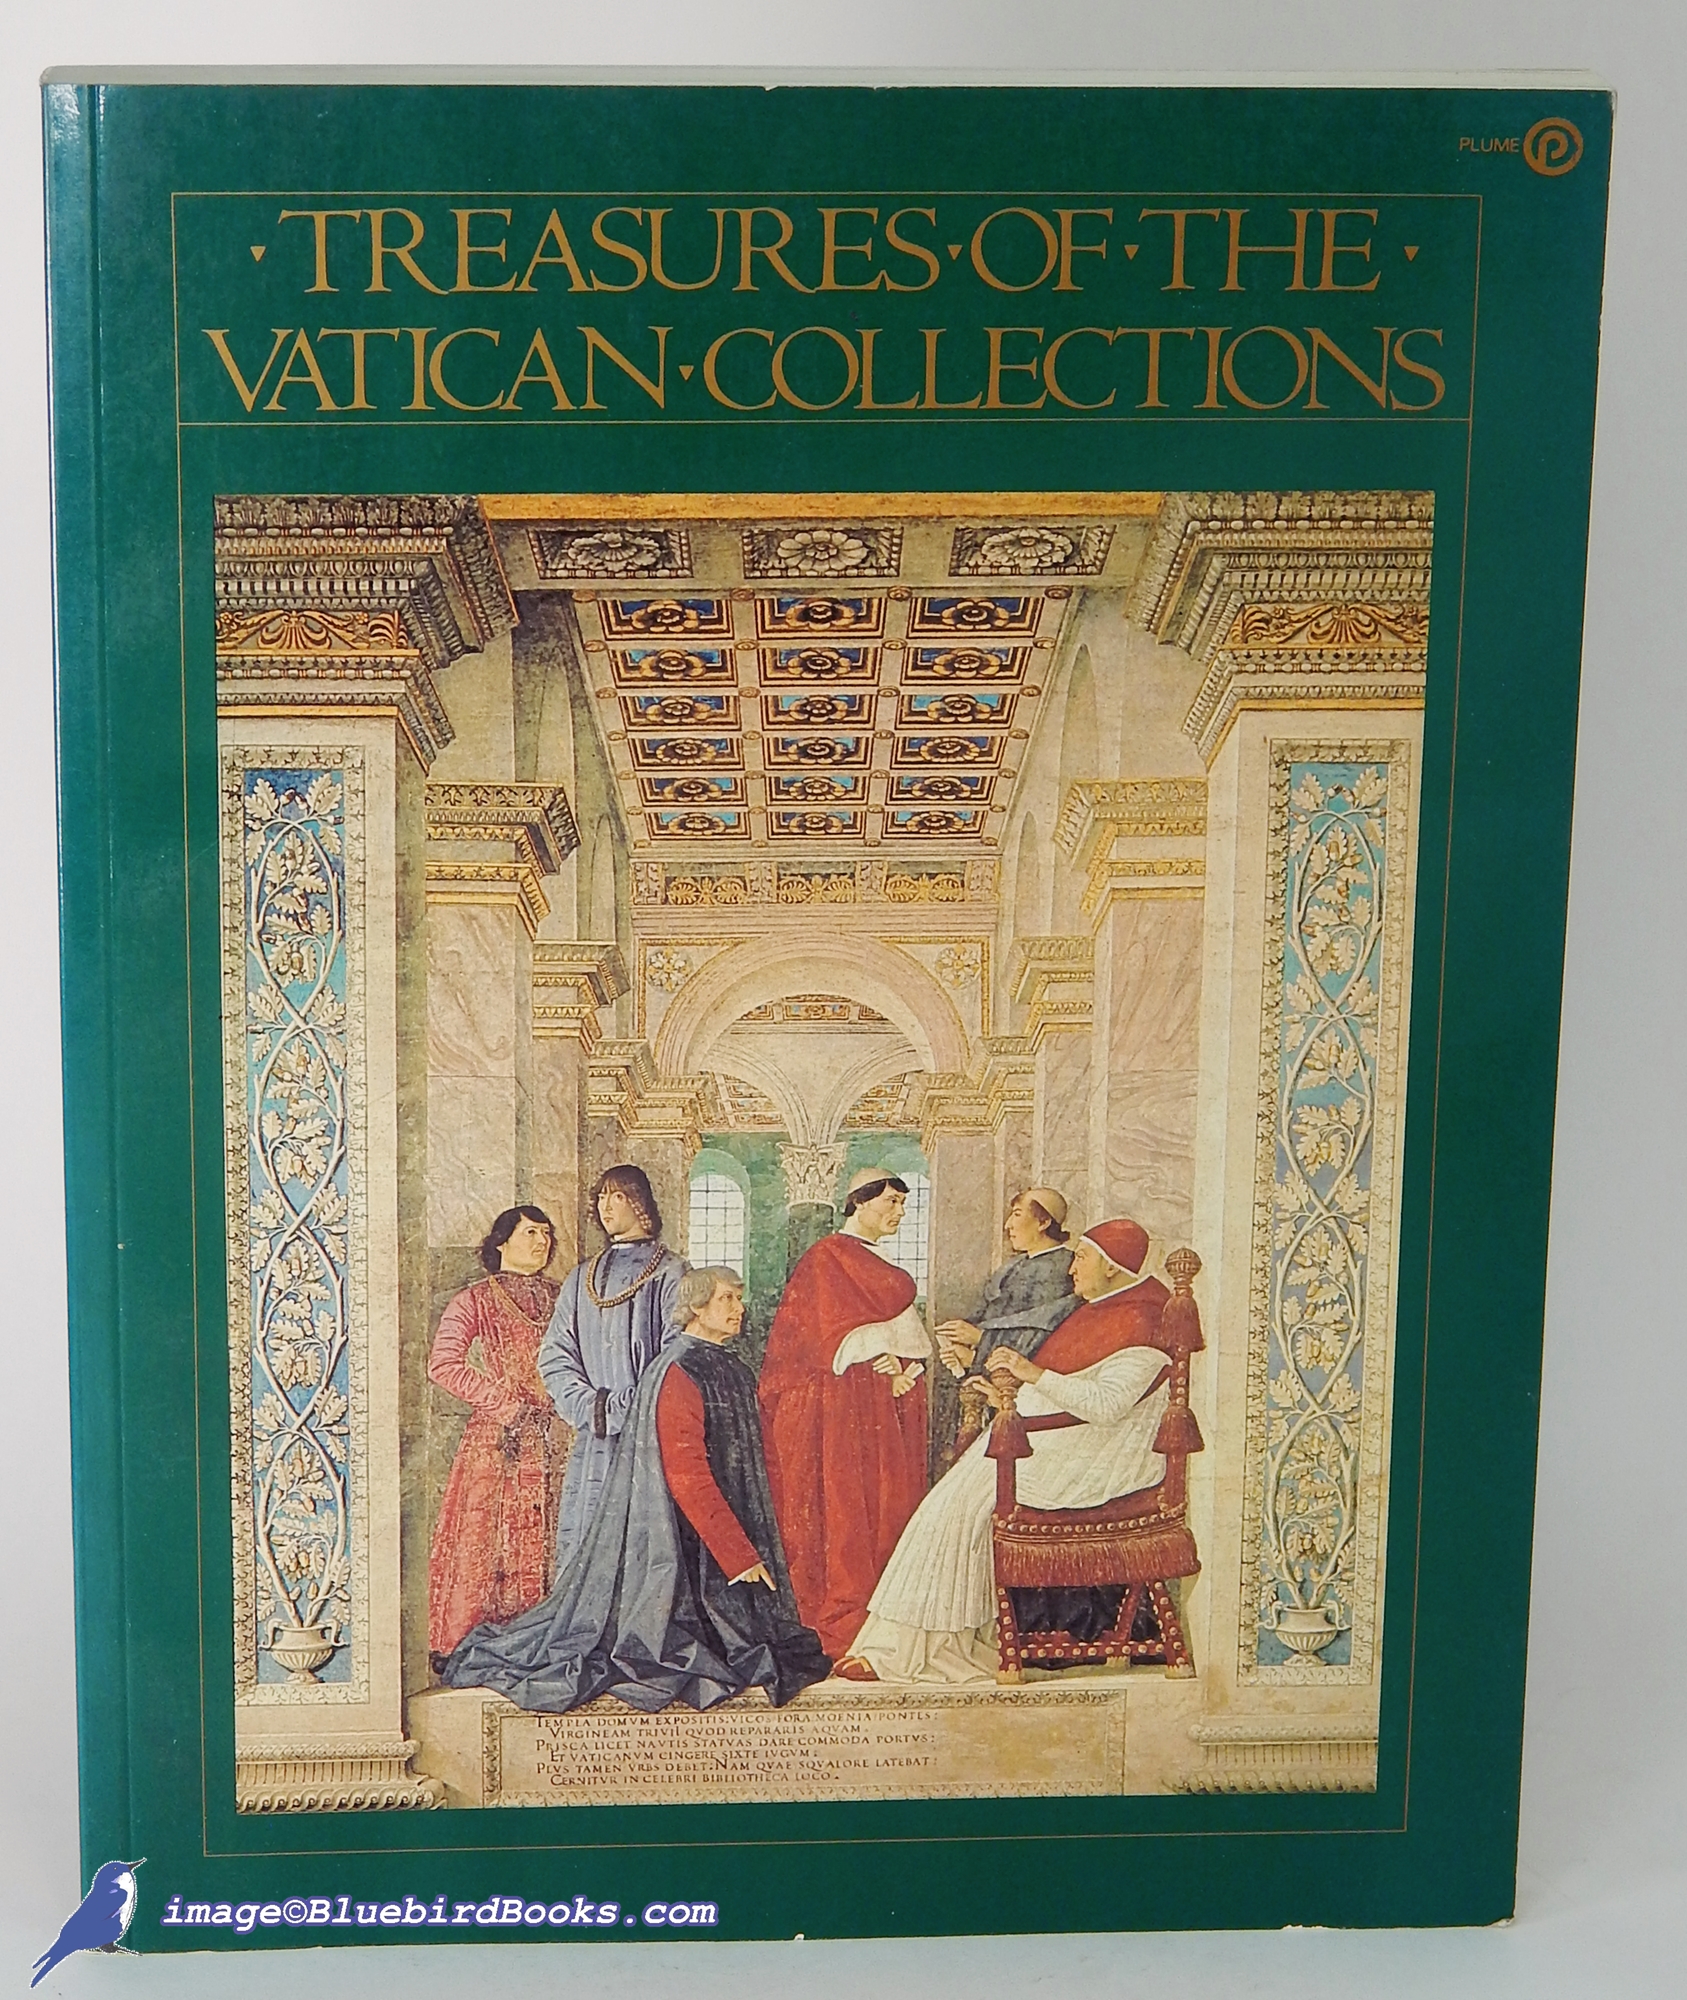 LEVY, ALAN - Treasures of the Vatican Collections